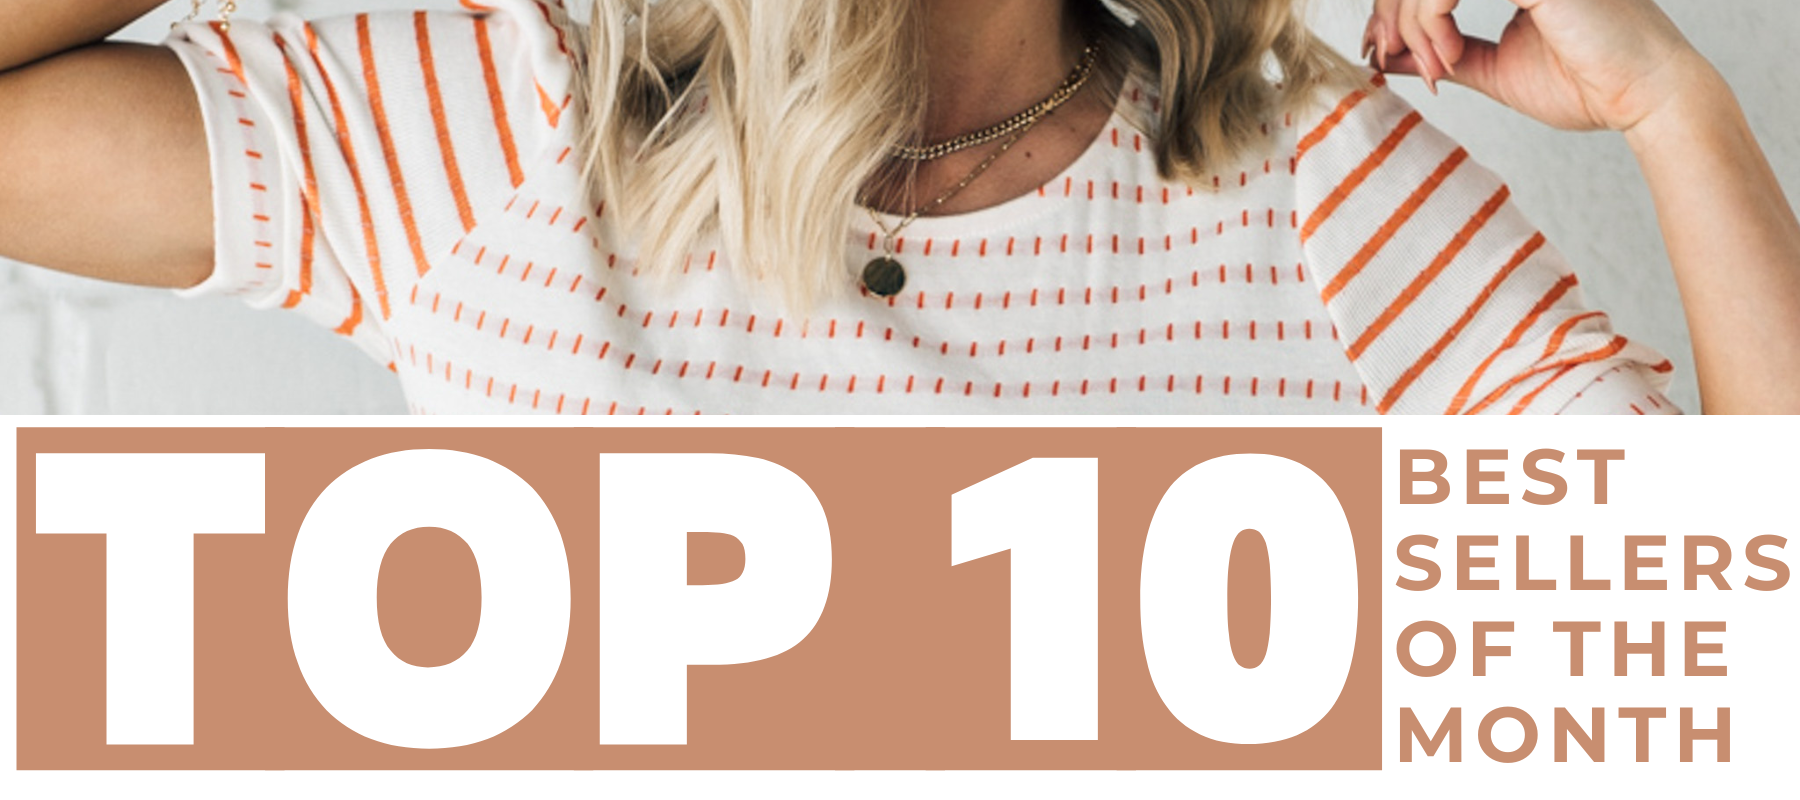 Top 10 Best Sellers of the month